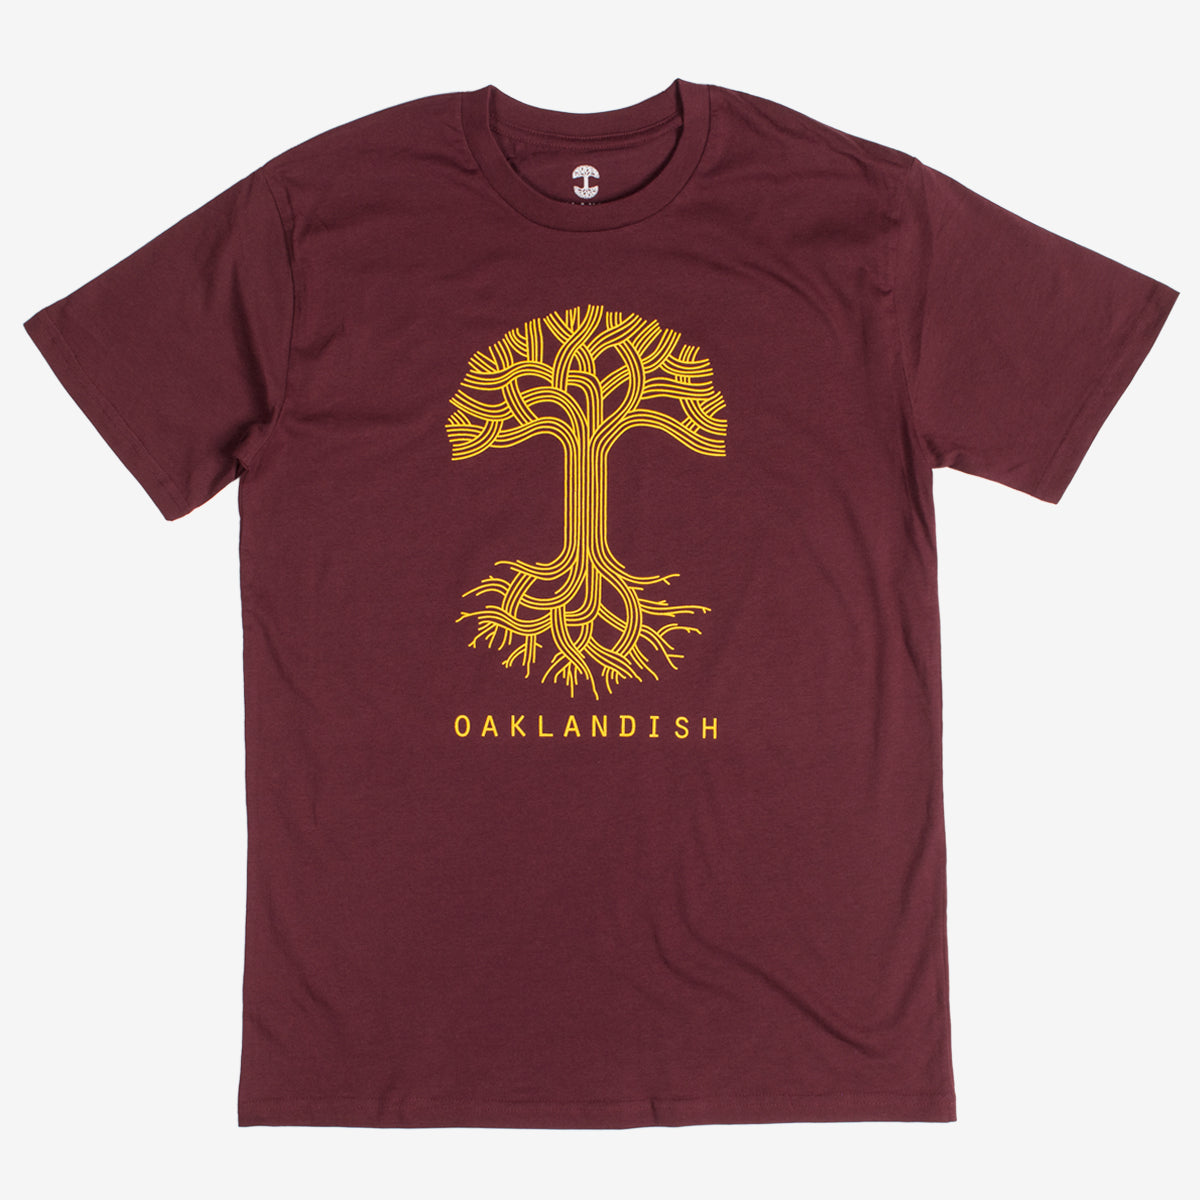  A burgundy t-shirt with a large gold Oaklandish tree logo on the chest.